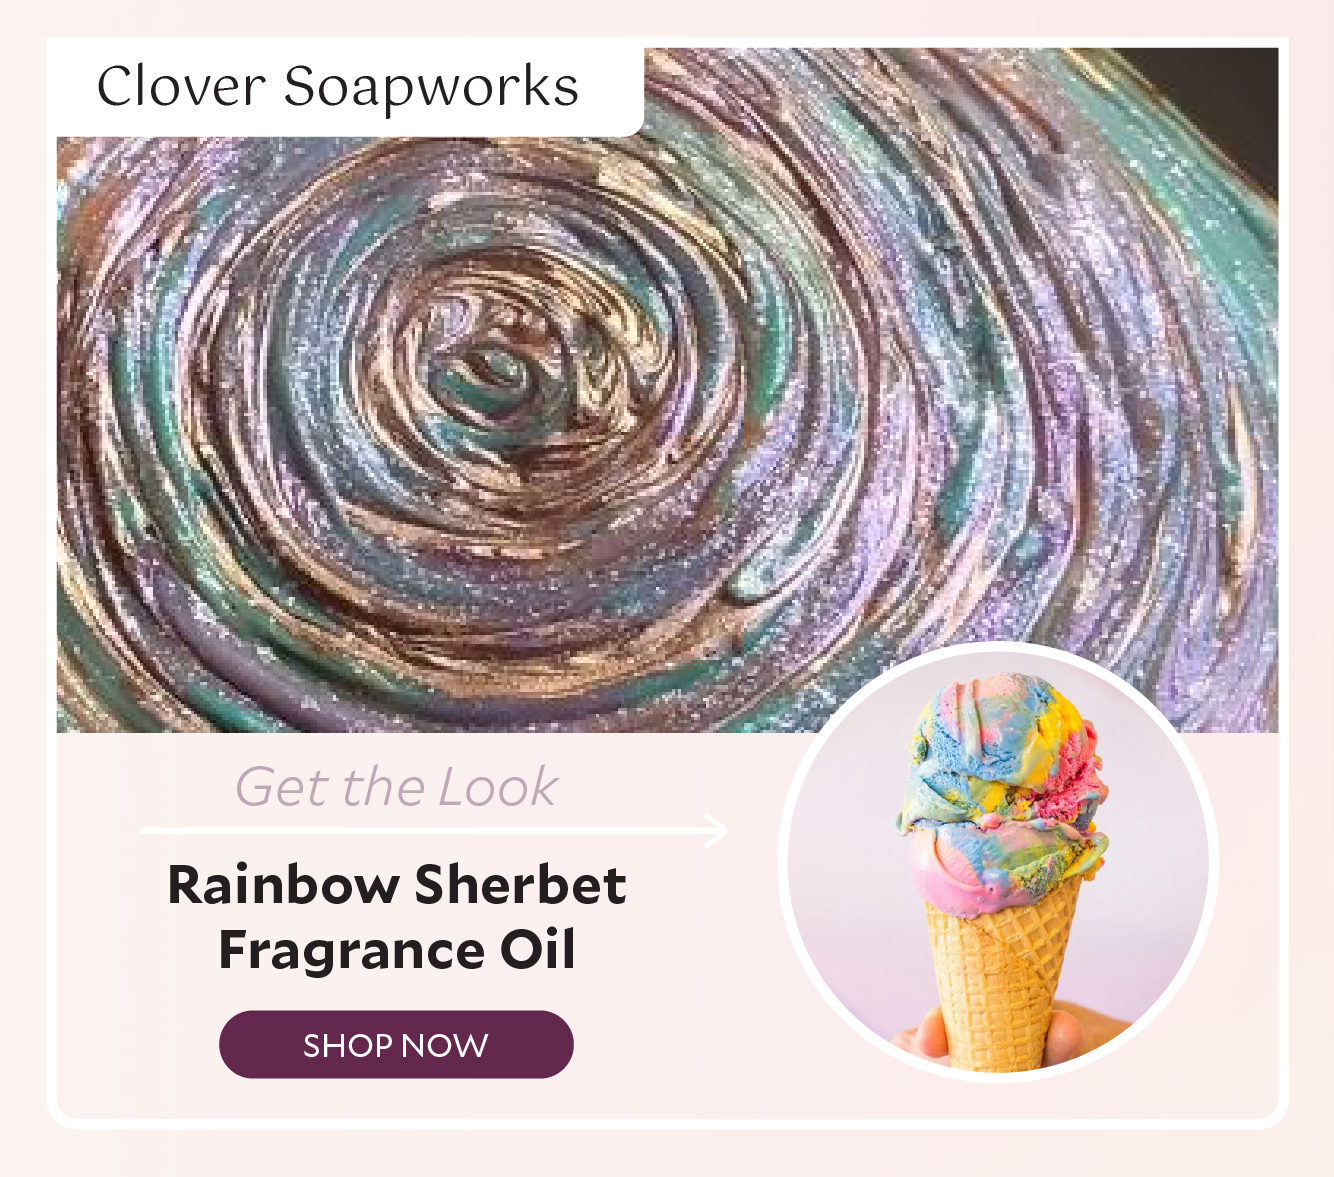 Clover Soapworks created this batch of soap using Rainbow Sherbet Fragrance Oil